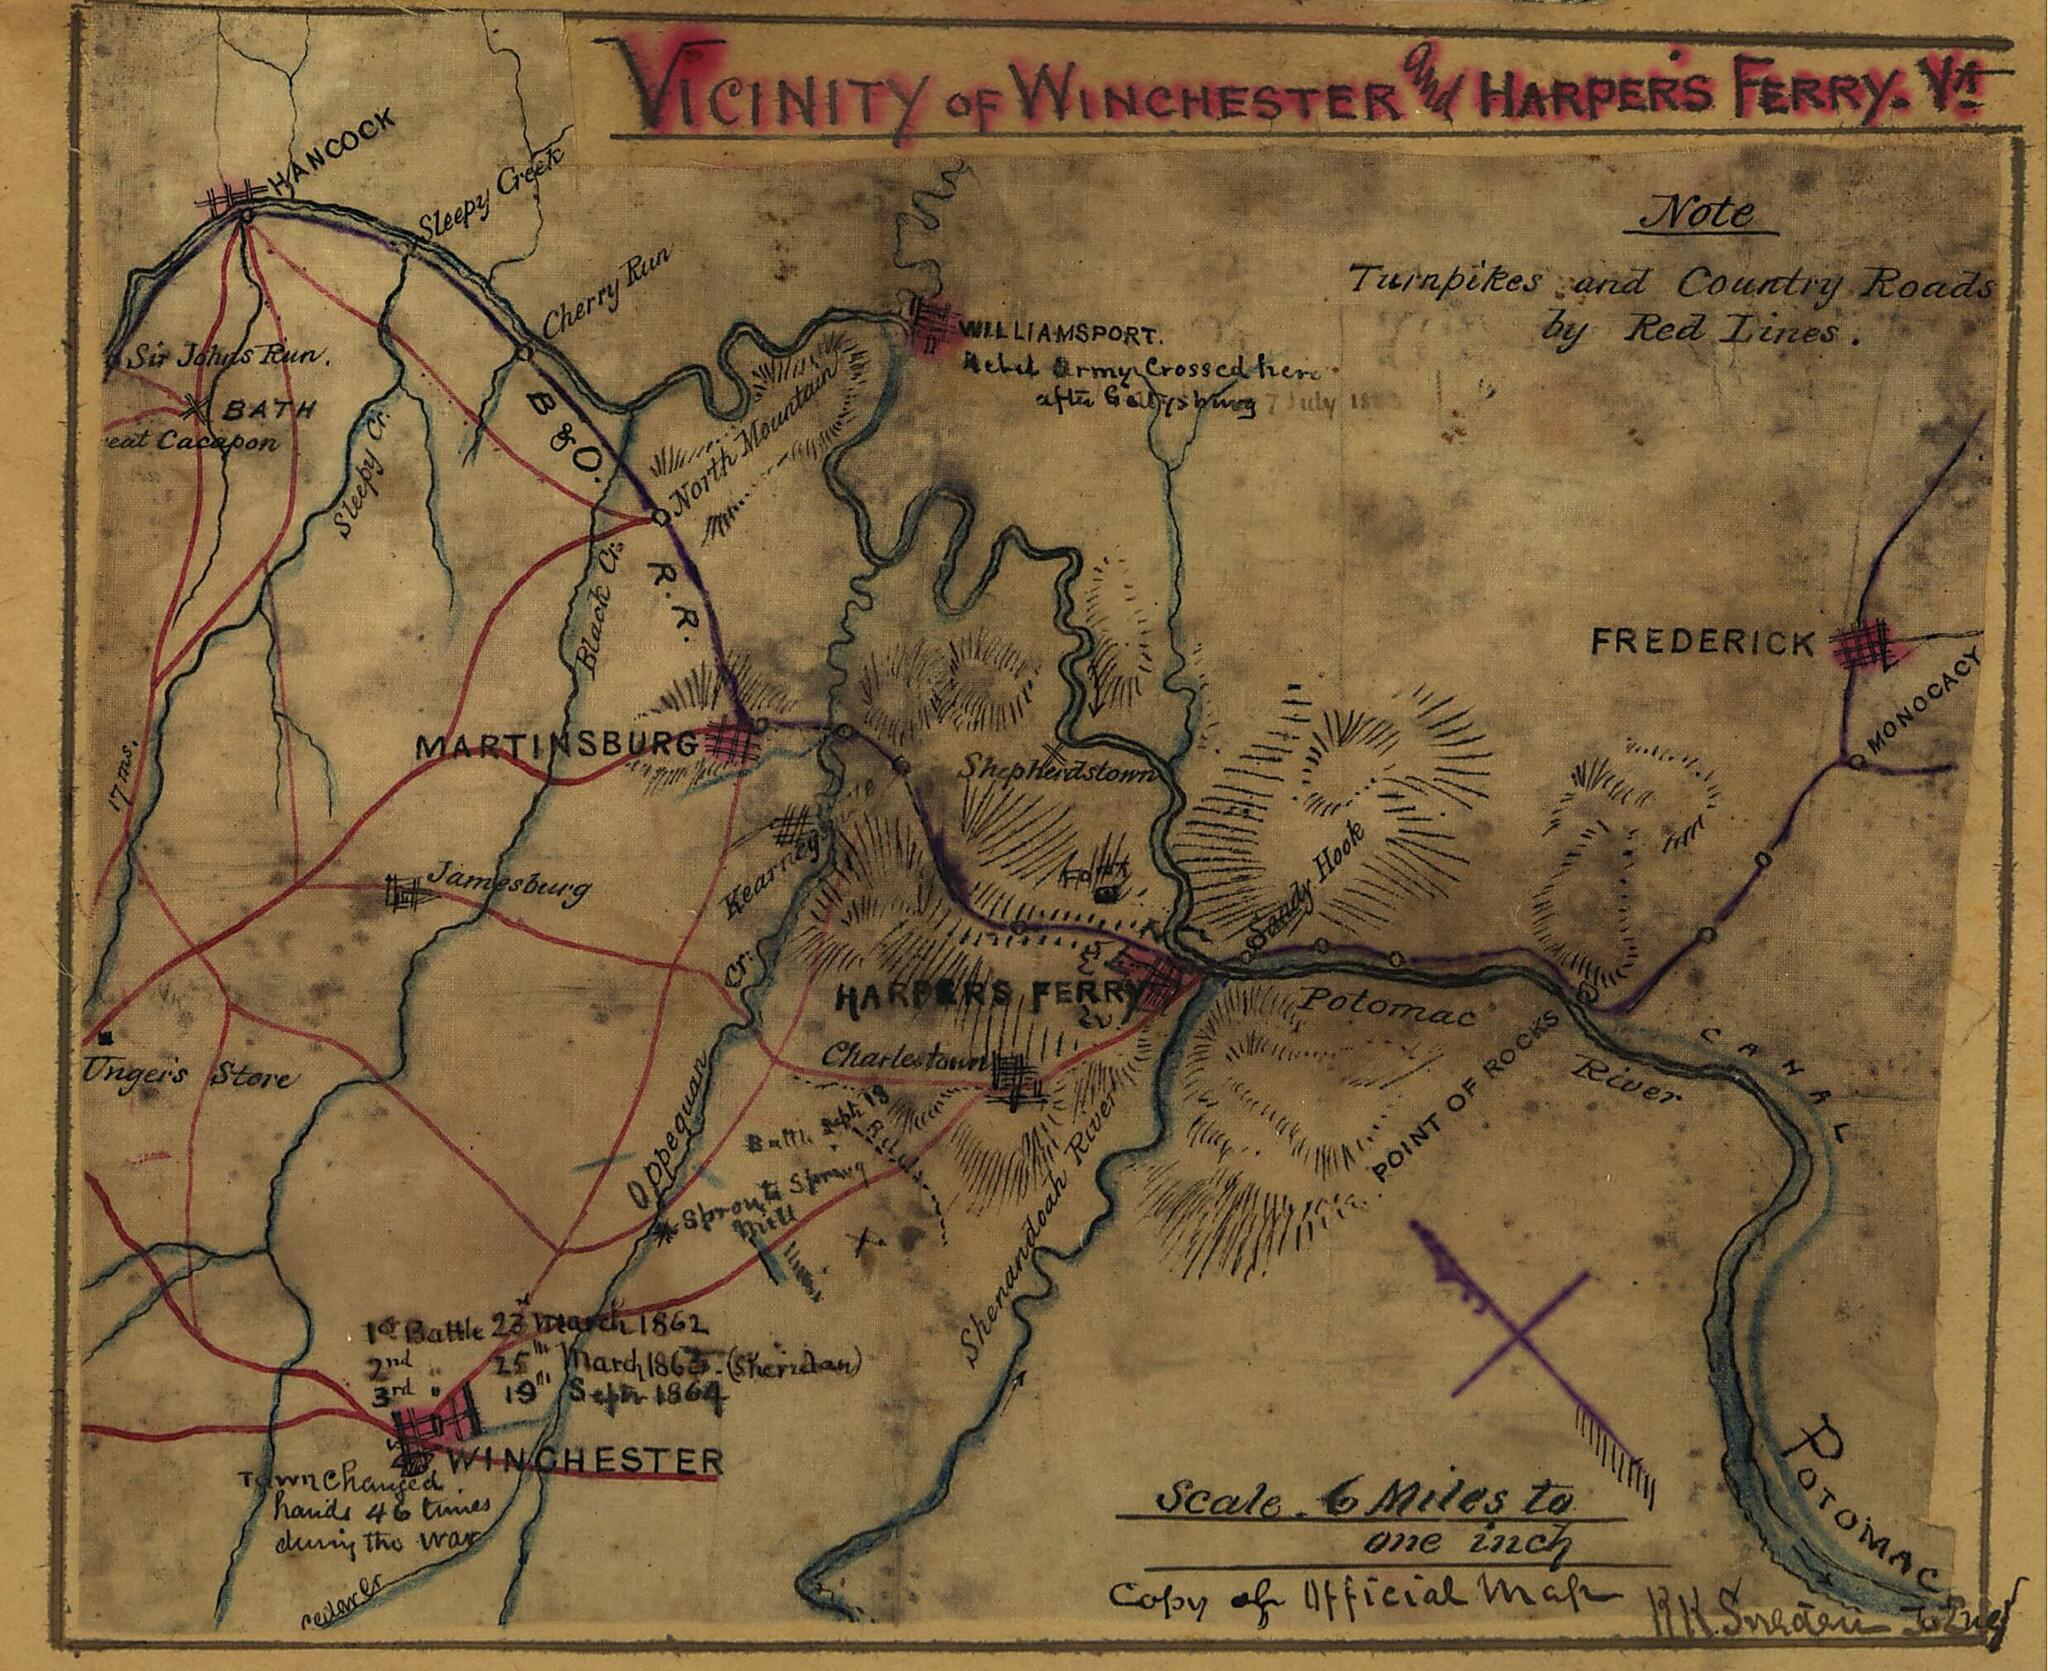 This old map of Vicinity of Winchester and Harper&